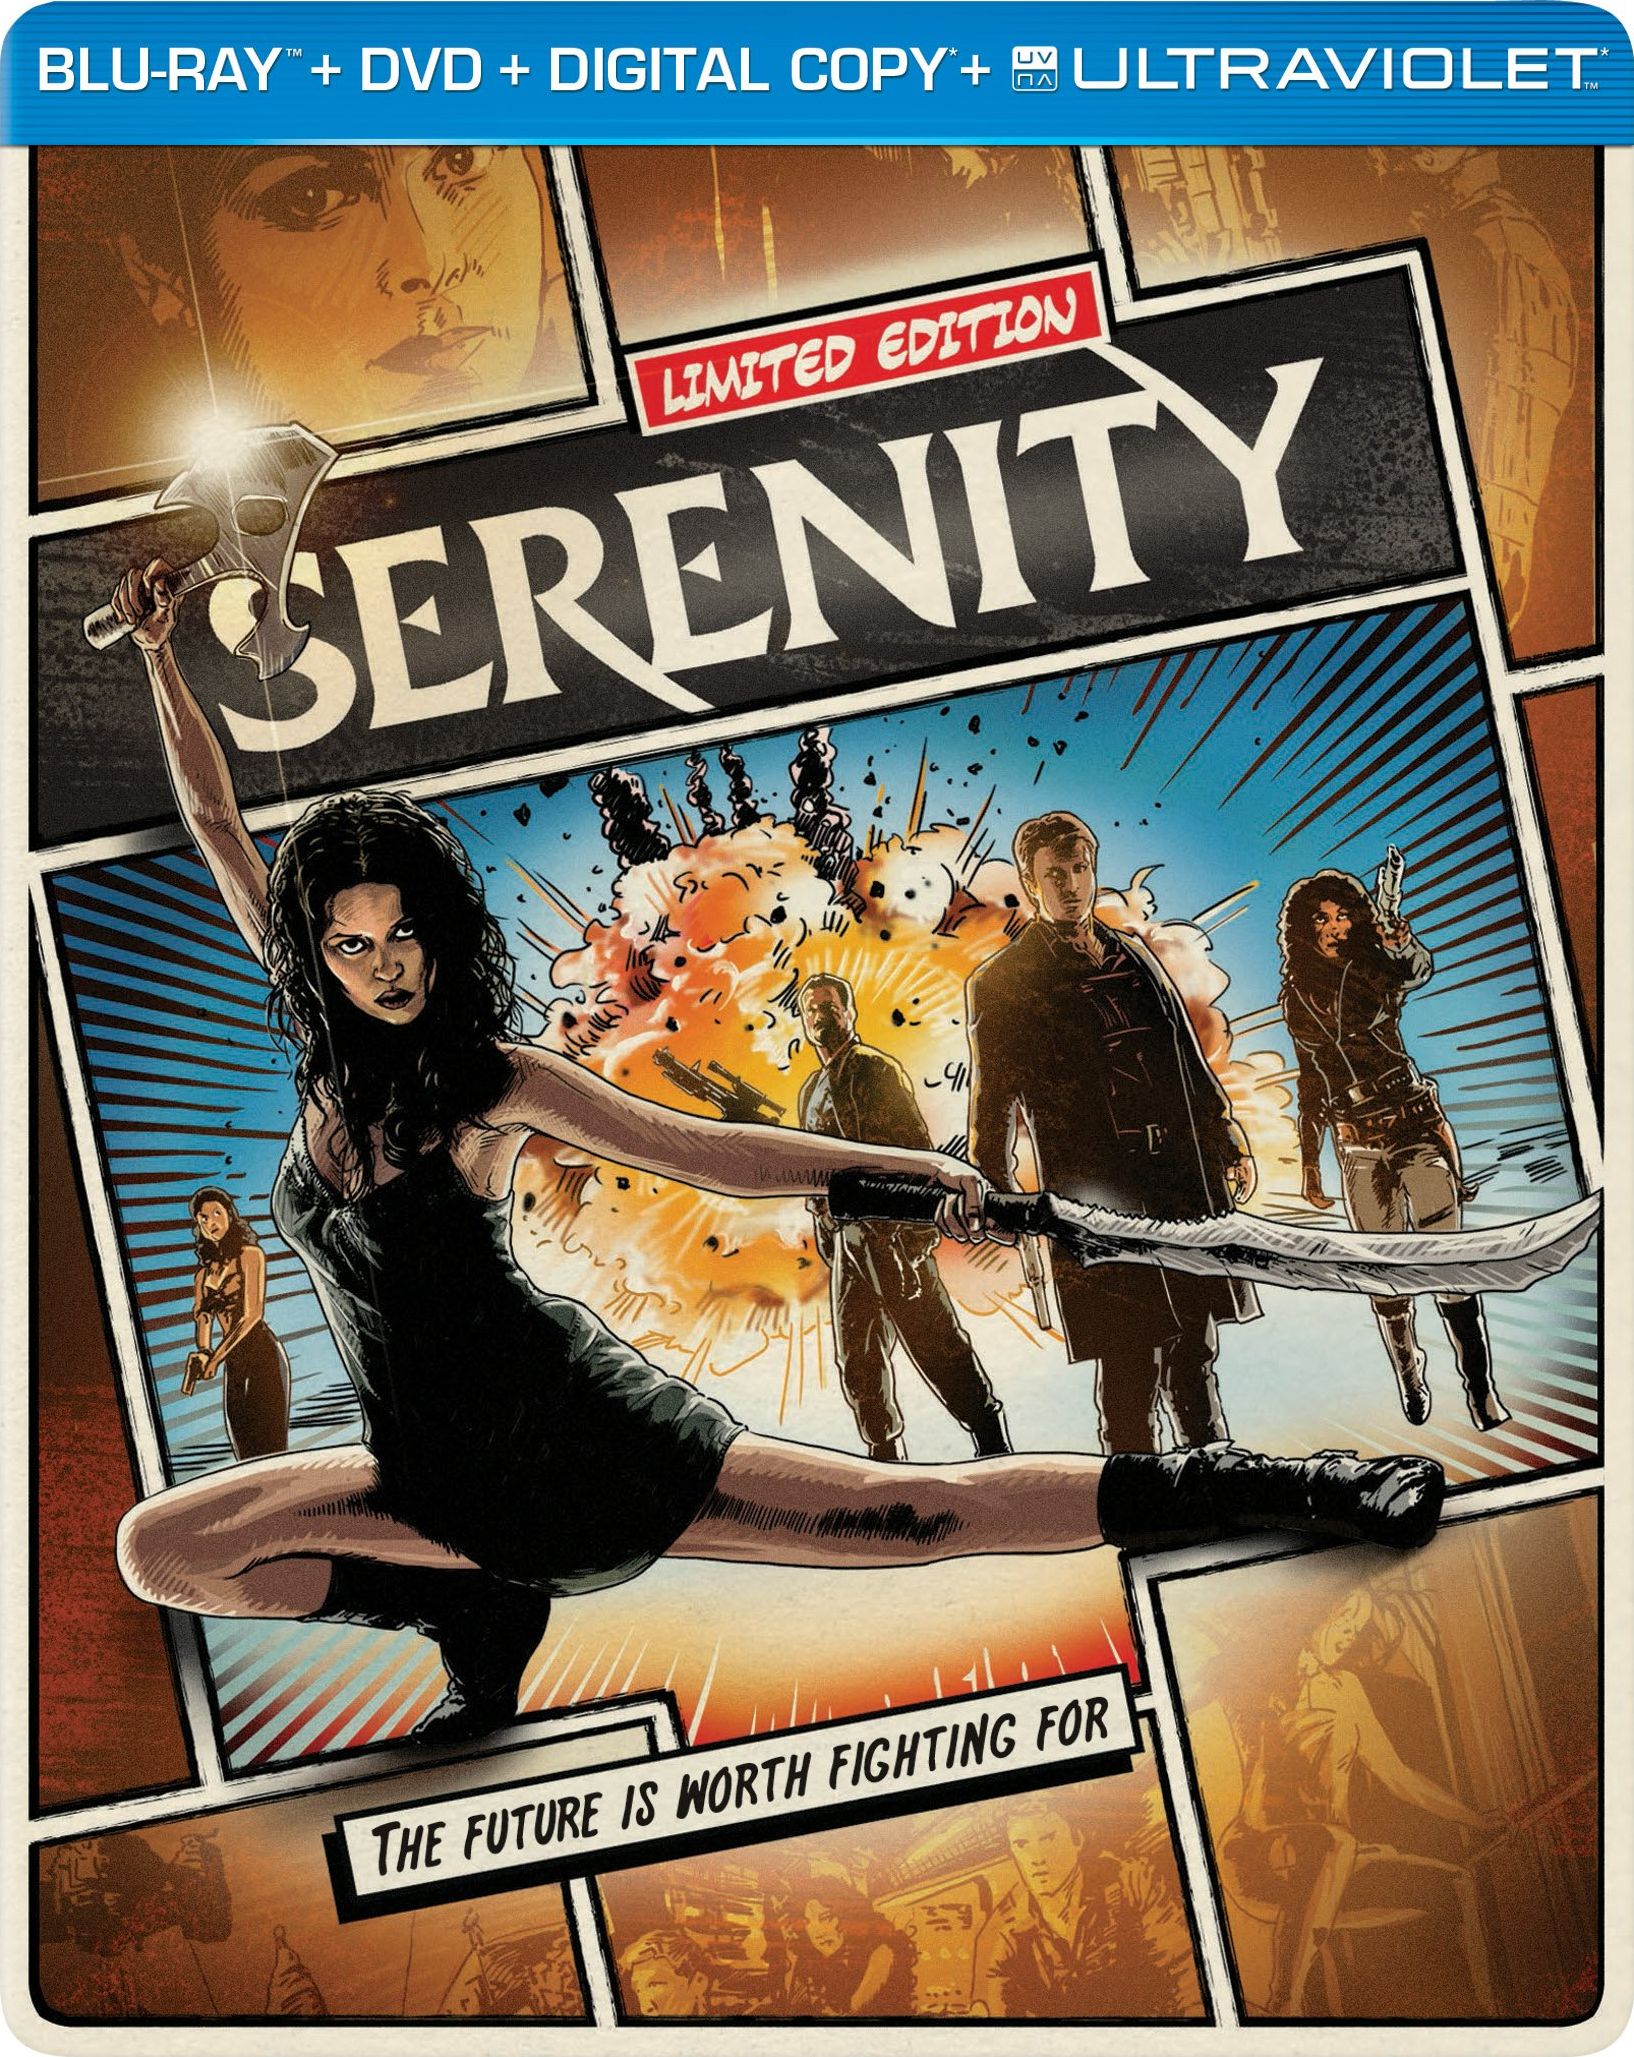 Serenity DVD Release Date May 6, 2008